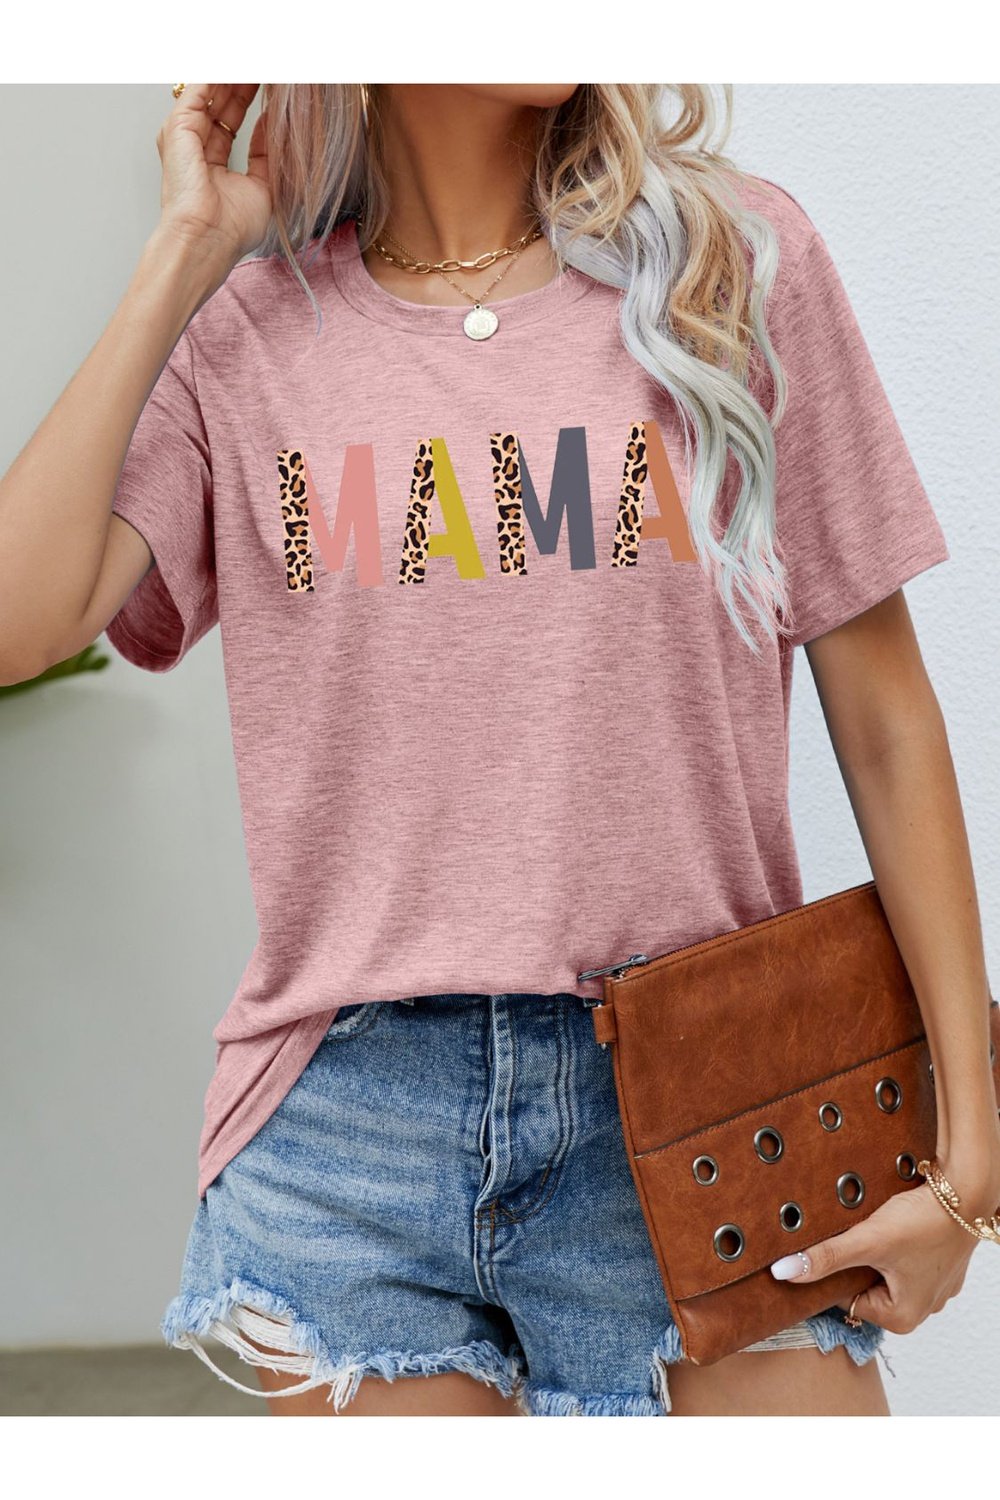 MAMA Leopard Graphic Short Sleeve Tee - T-Shirts - FITGGINS